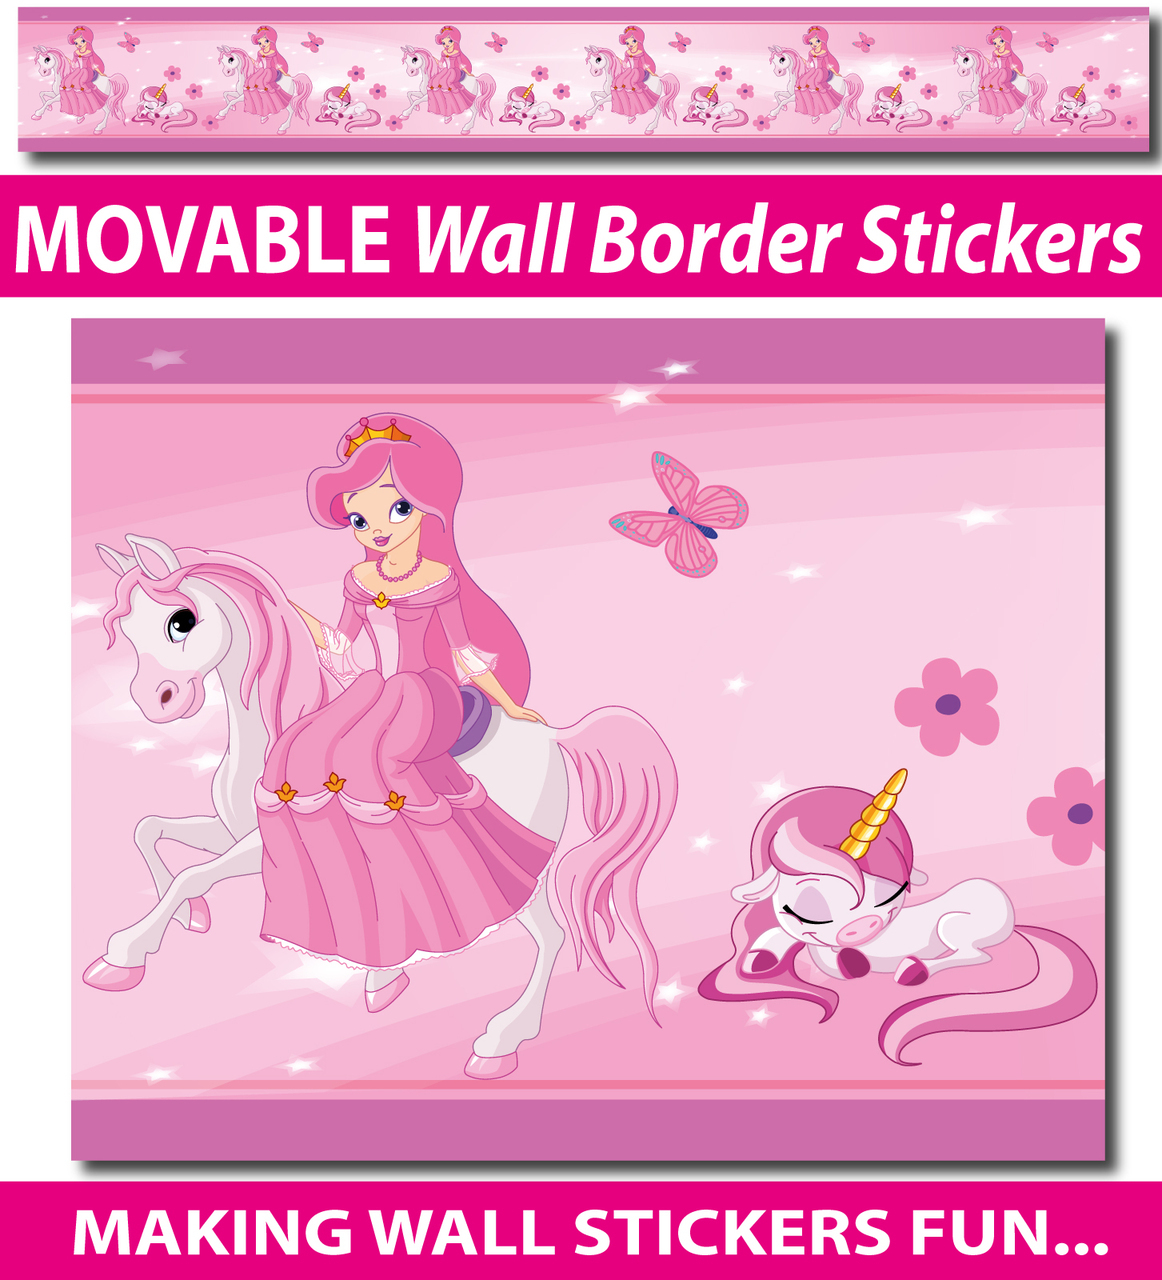 Free Download Princess And Unicorns Wall Border Stickers Totally Movable 1162x1280 For Your Desktop Mobile Tablet Explore 43 Unicorn Wallpaper Border Unicorn Wallpapers Pink Unicorn Wallpaper Bing Wallpaper Pink Unicorns